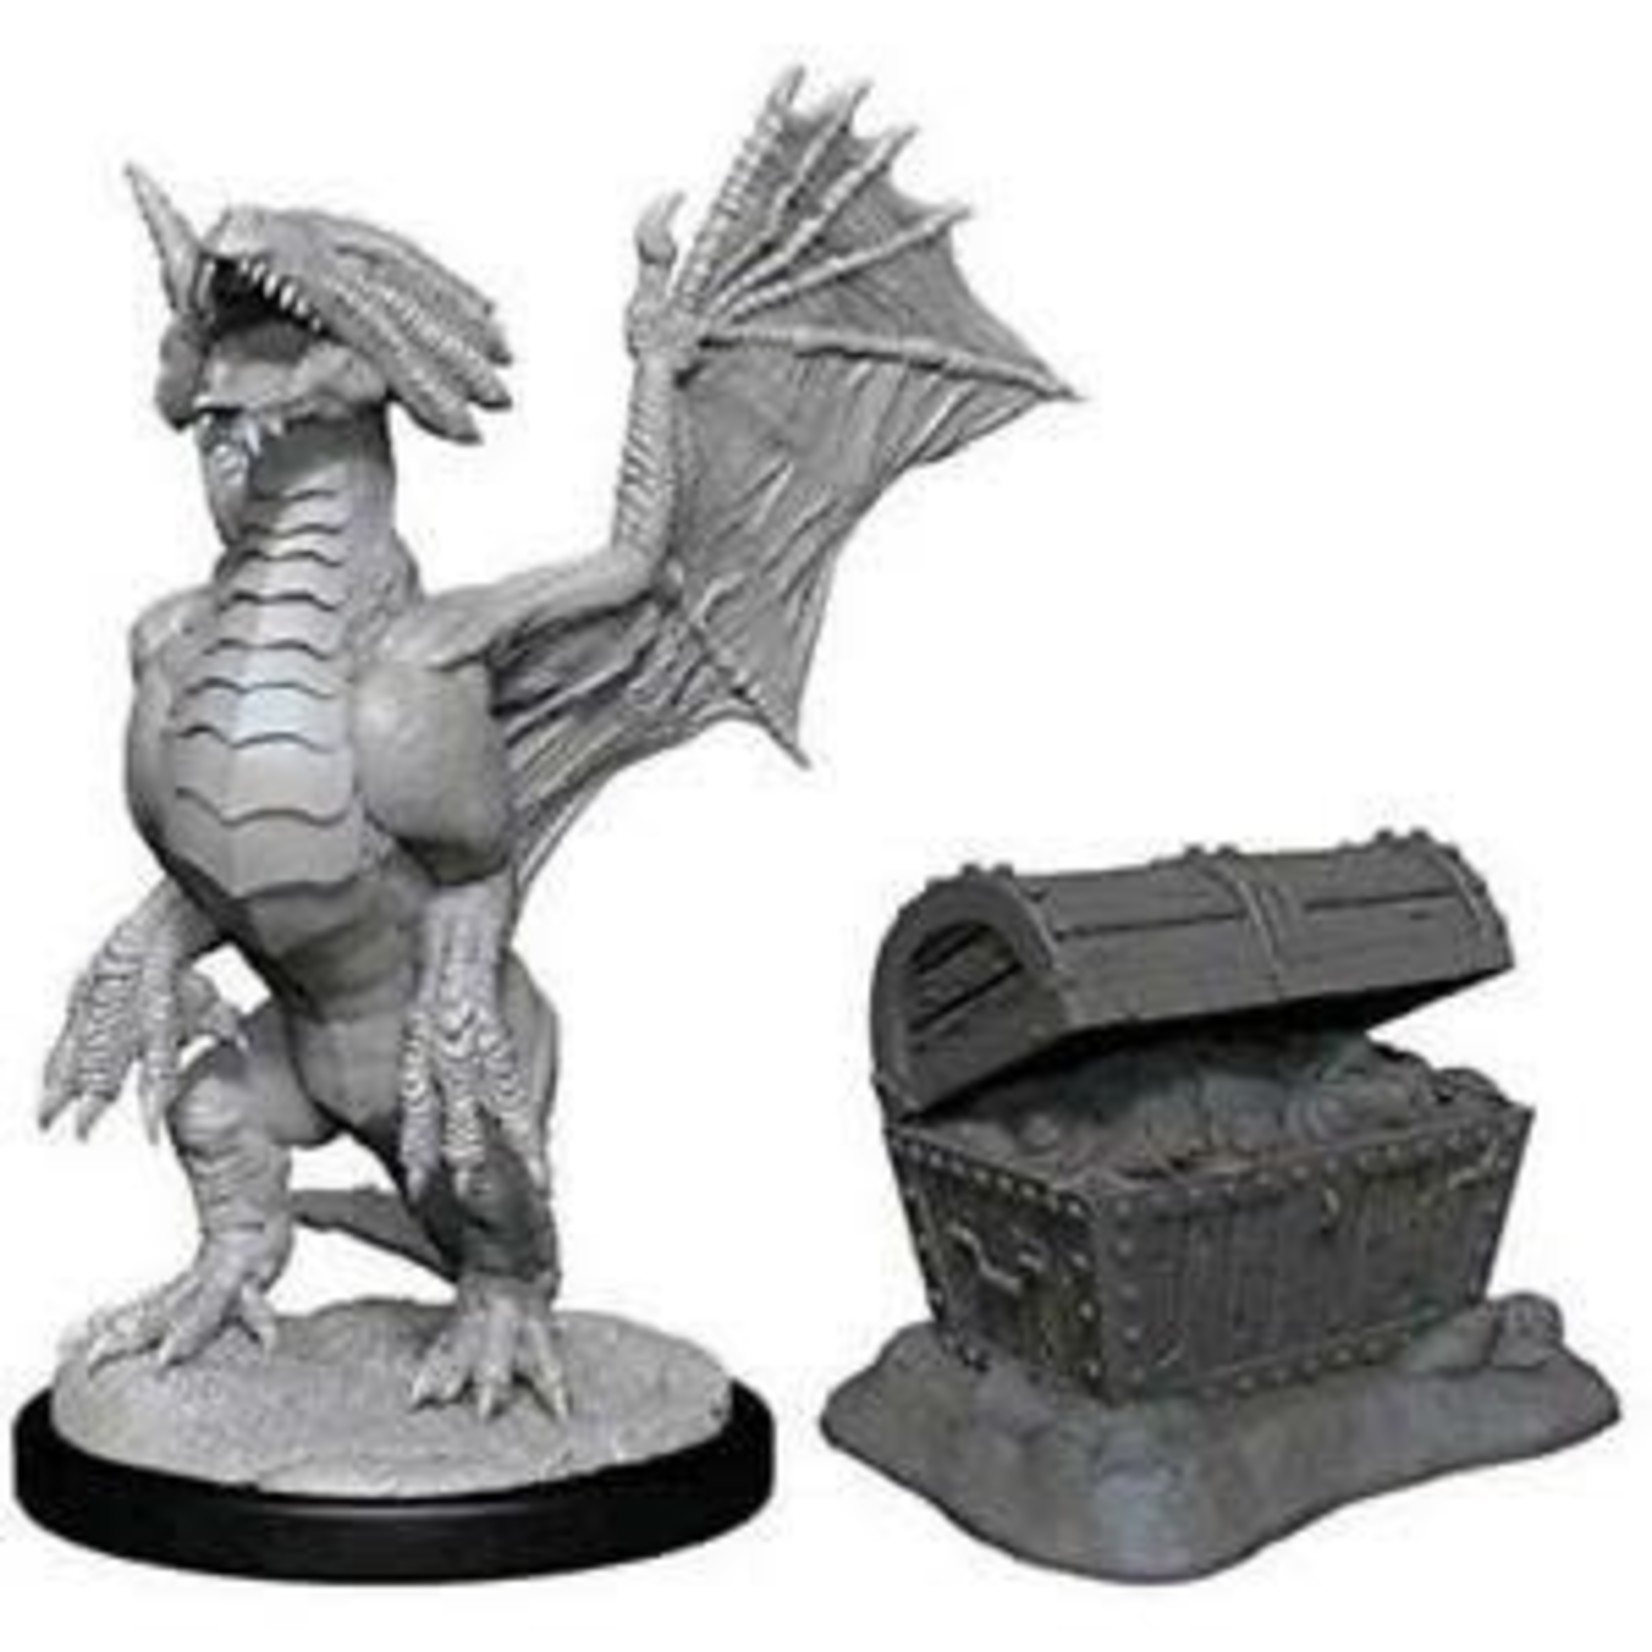 WizKids Dungeons and Dragons Nolzur's Marvelous Minis Bronze Dragon Wyrmling and Pile of Sea Treasure